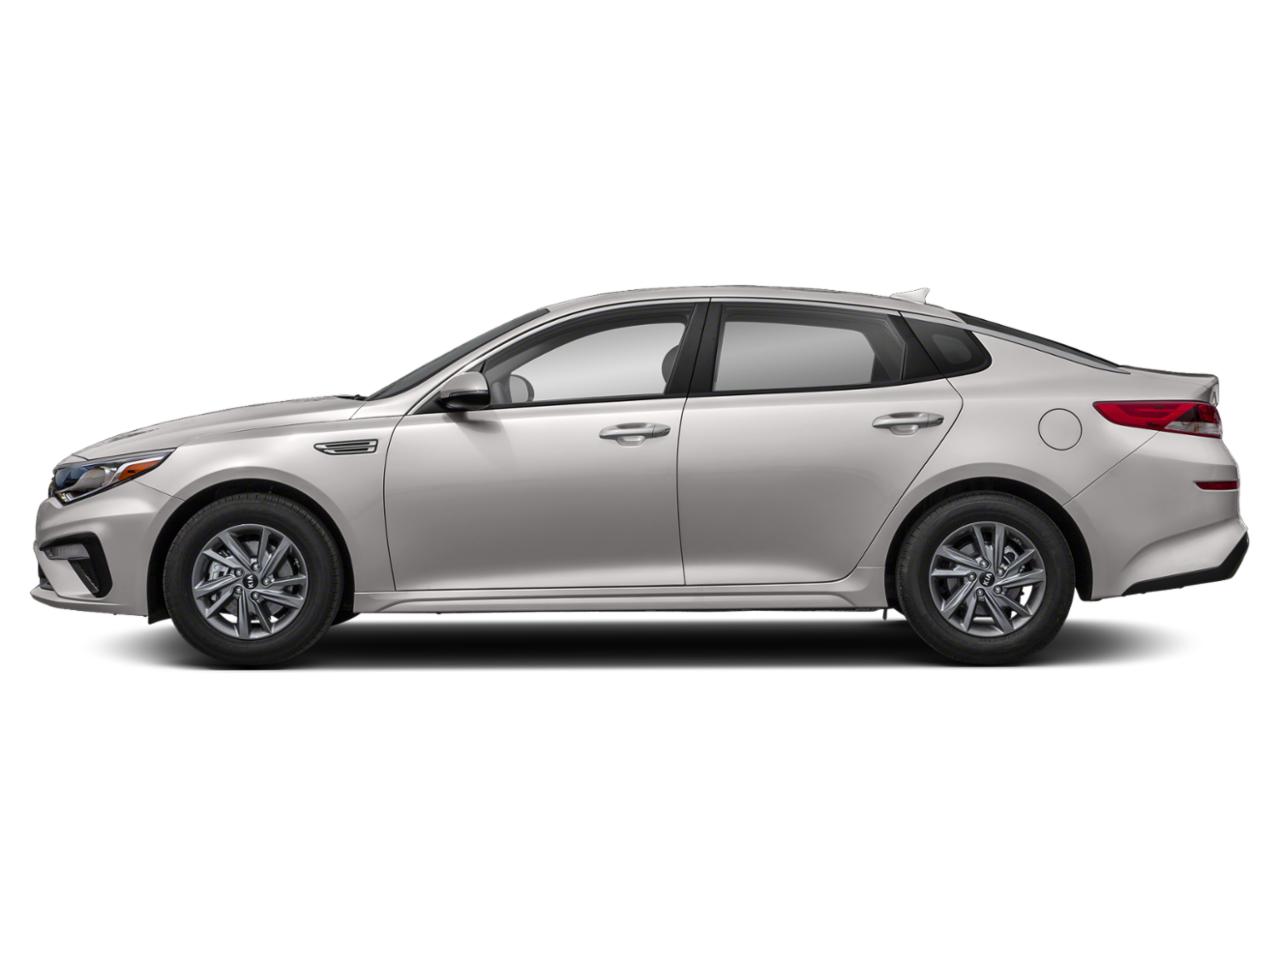 Used 2020 Kia Optima LX with VIN 5XXGT4L3XLG445965 for sale in Dublin, GA